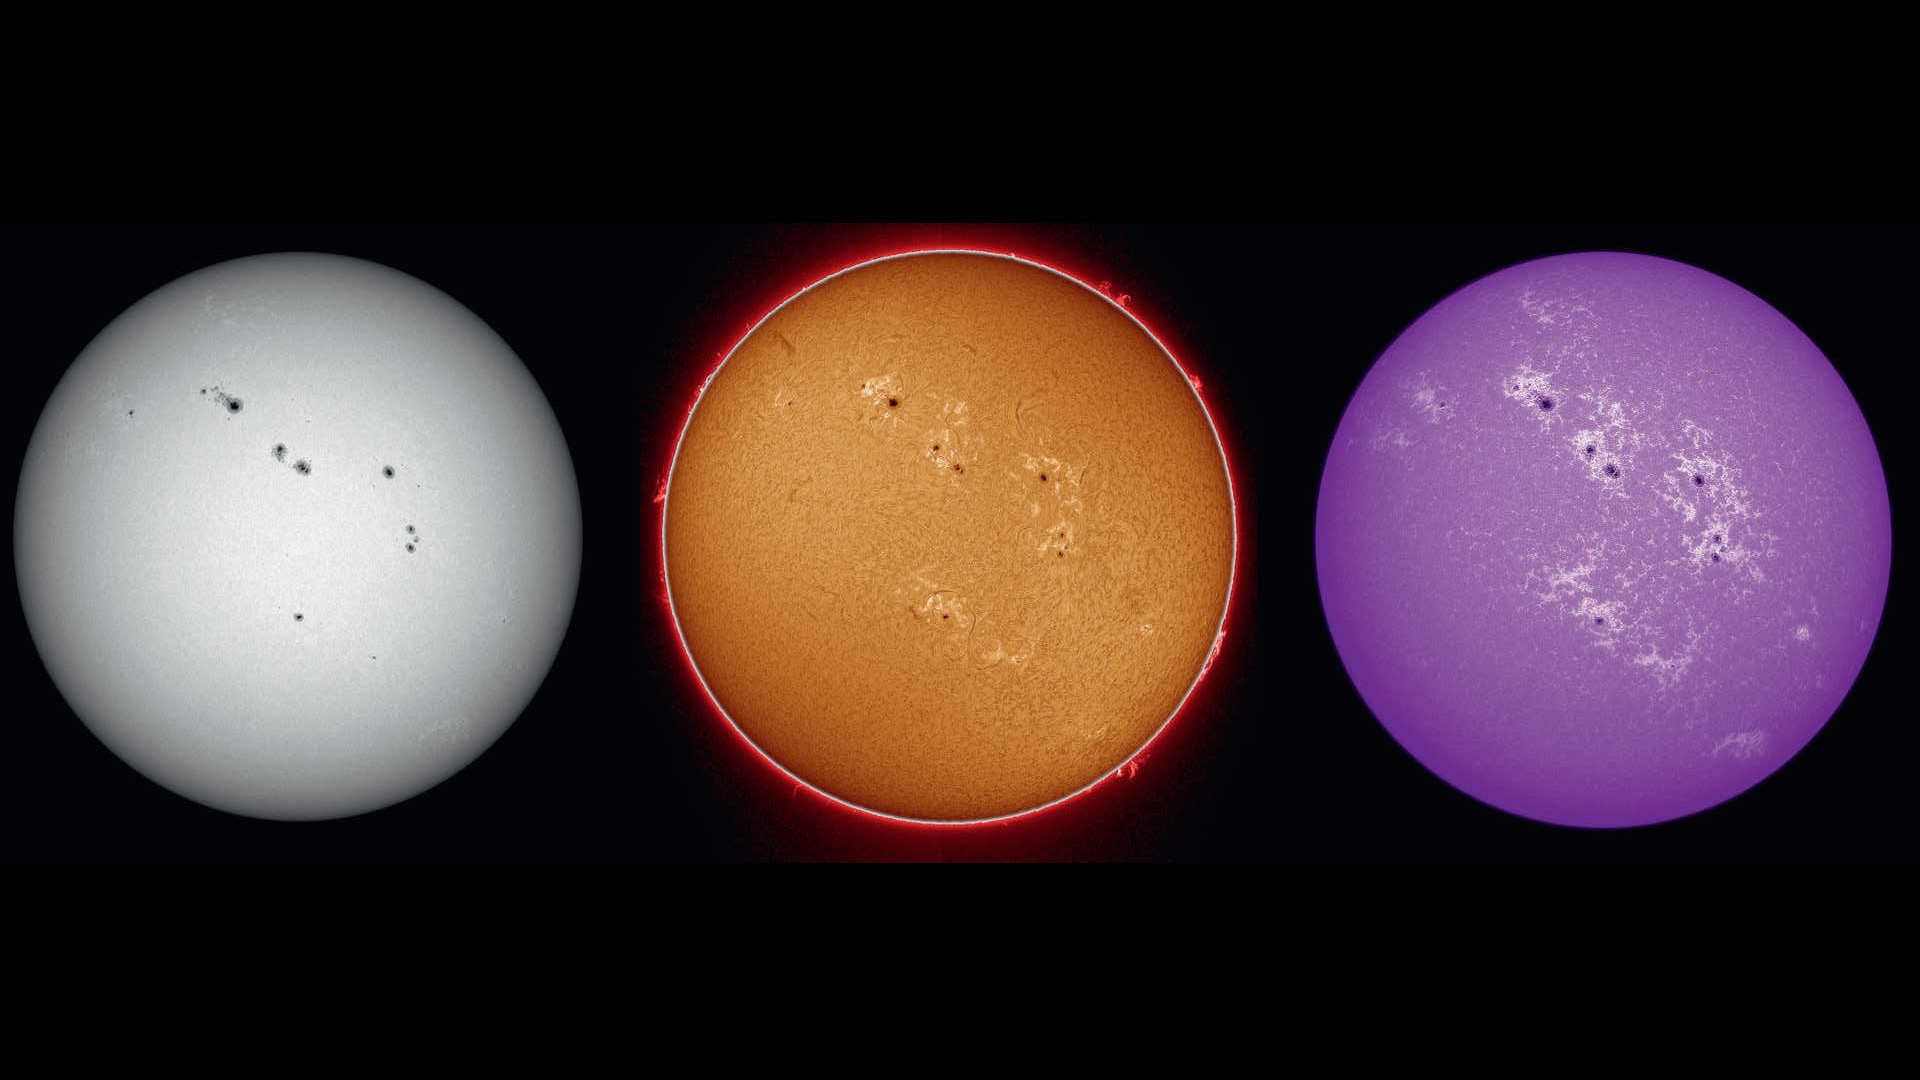 Views of the Sun in white light, in Hα light and in CaK light. An uncooled CCD camera together with a short focal length telescope with a 60-mm aperture and a 600-mm focal length was used to create these images using a foil filter, a Hα filter and a CaK filter. Combination of composite images, each created from 500 images from a 2,500 image capture sequence. U. Dittler